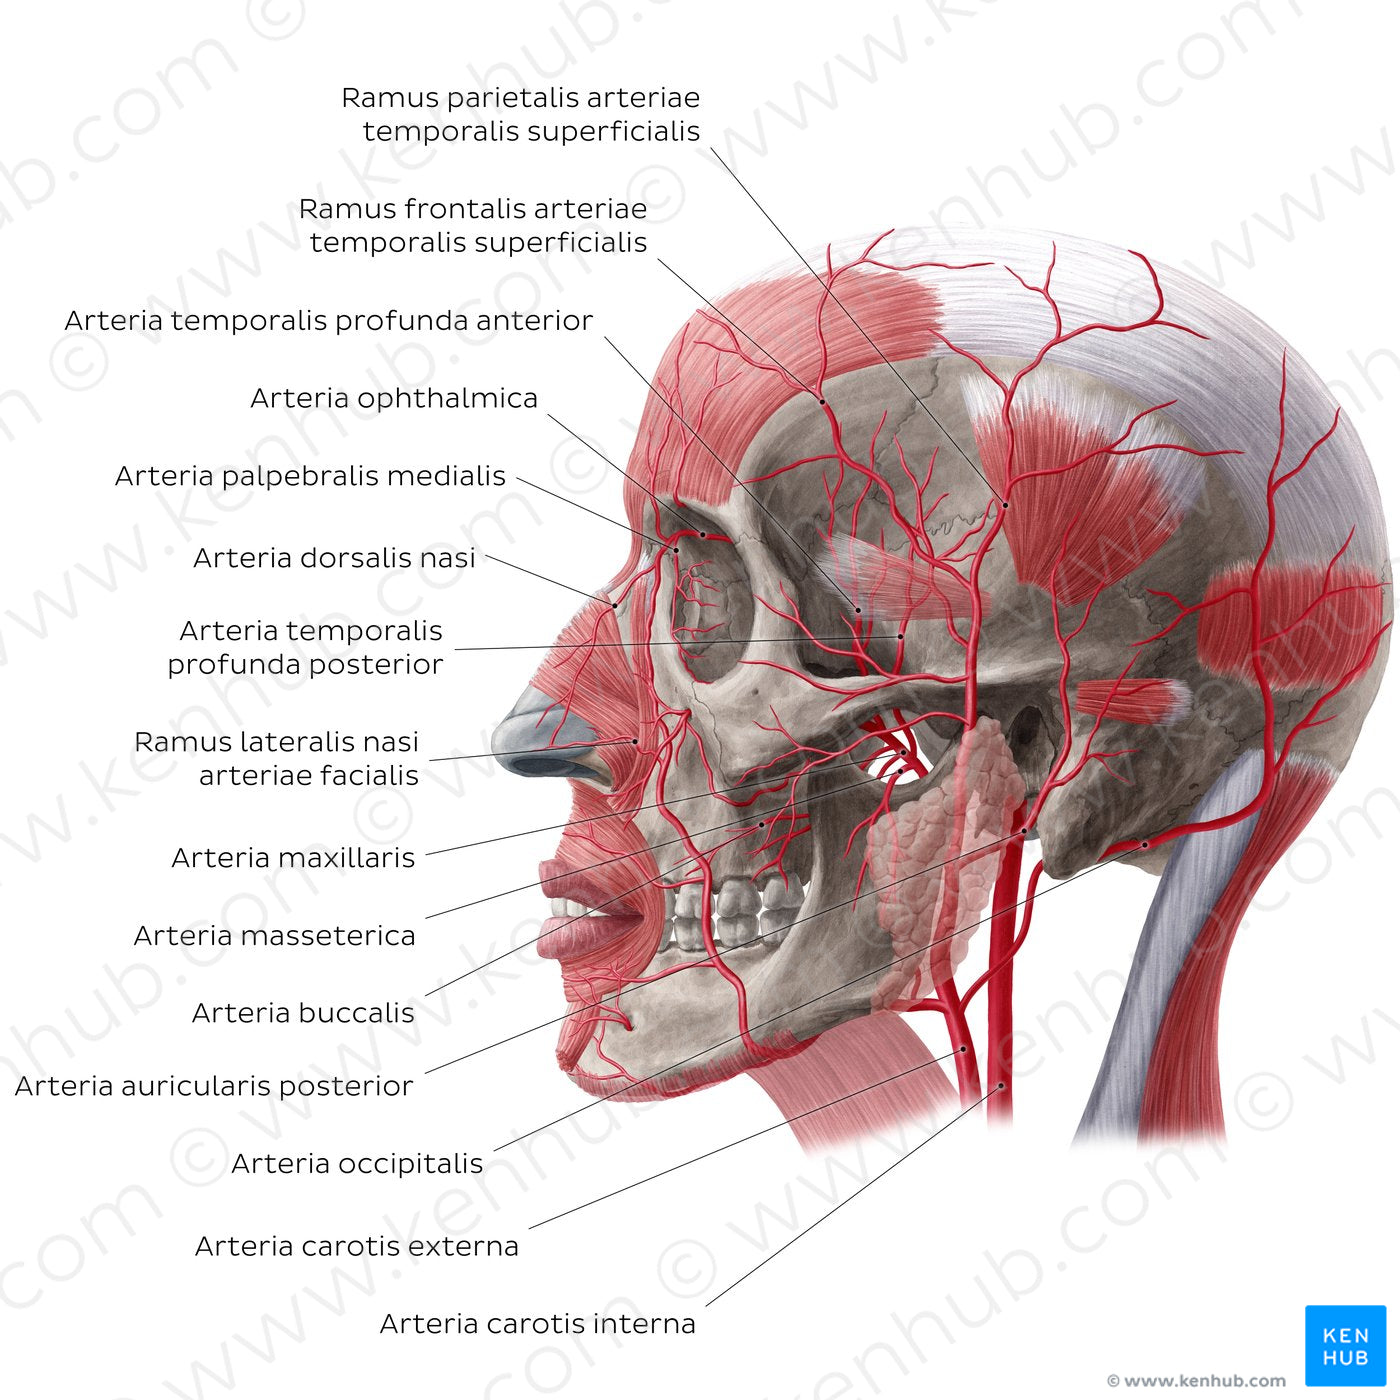 Arteries of face and scalp (Lateral view) (Latin)